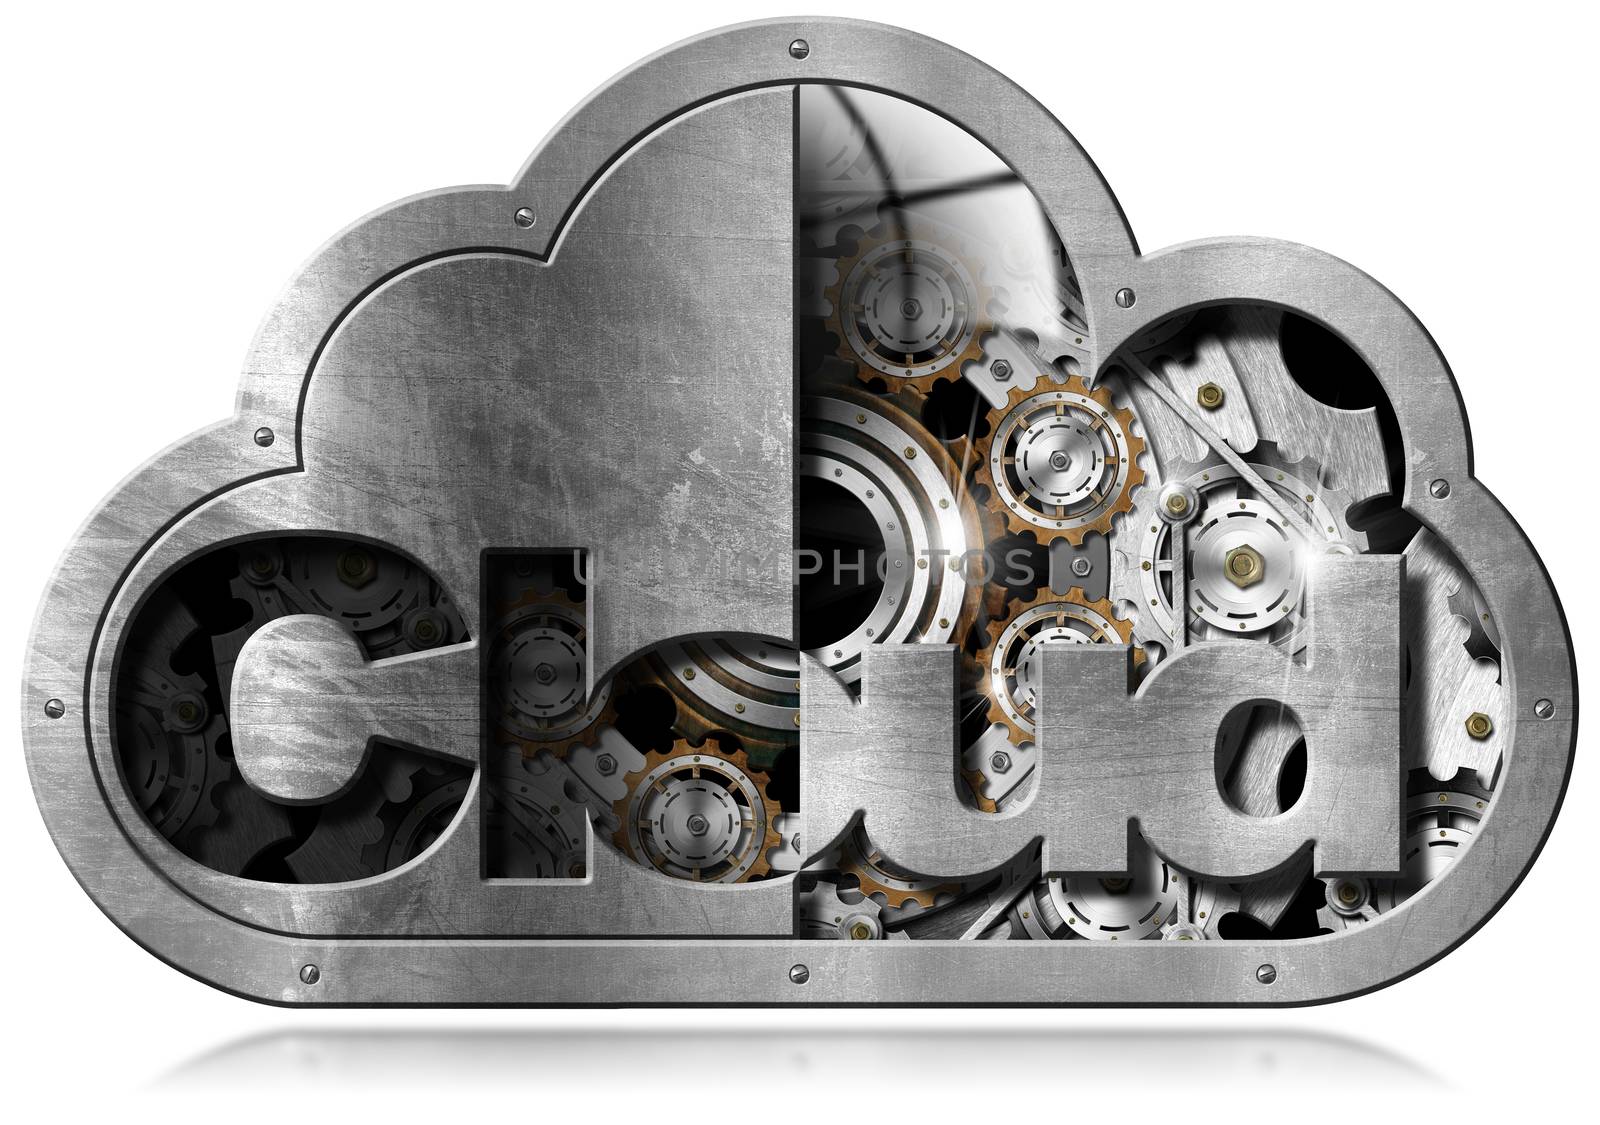 Metallic symbol in the shape of a cloud with metal gears and text Cloud. Concept of cloud computing